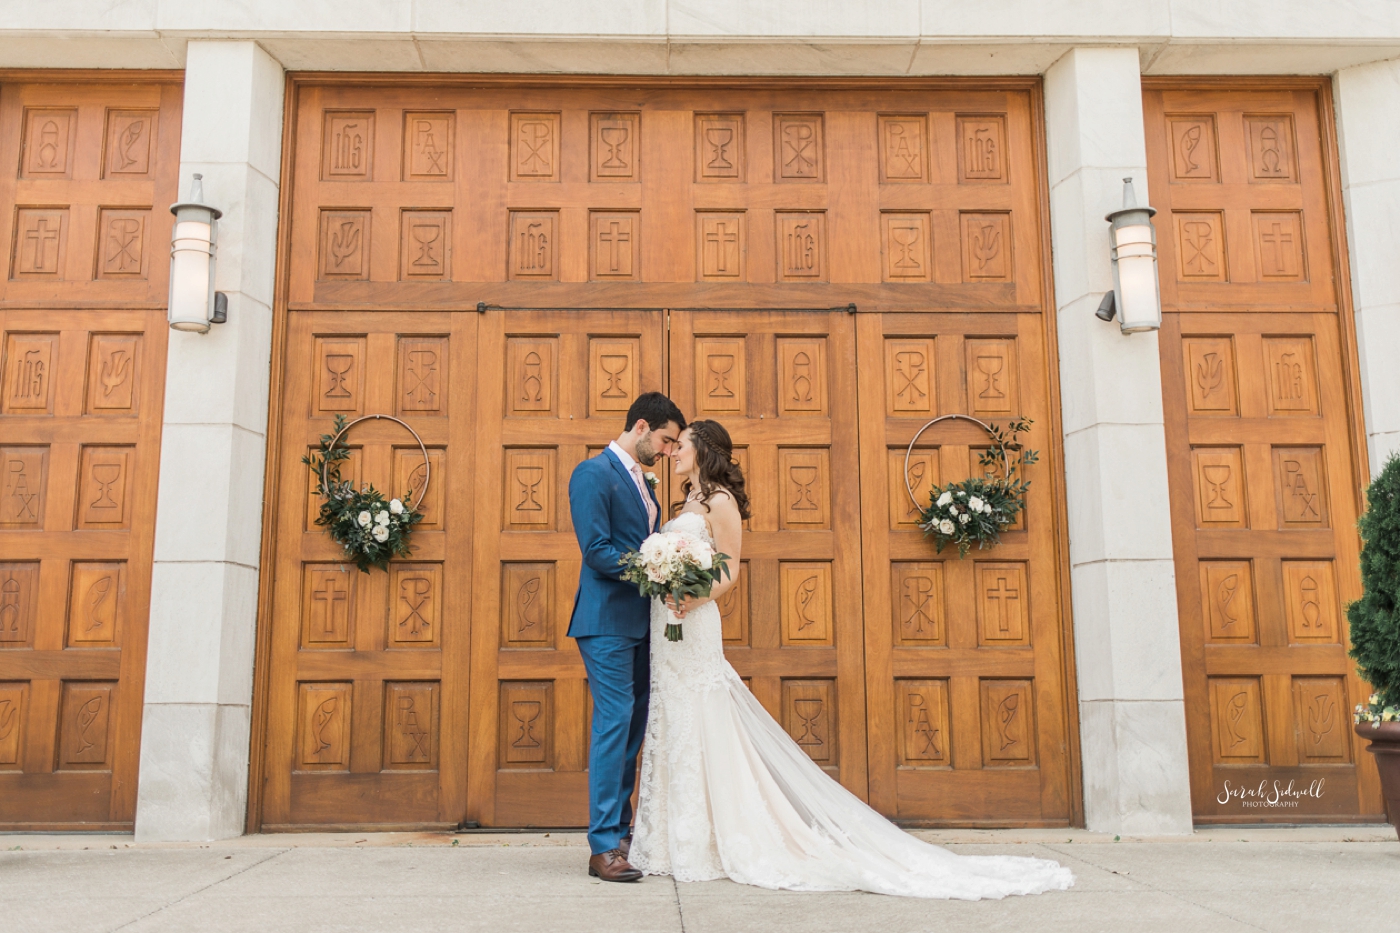 A groom kisses his bride in front of large wooden doors. 